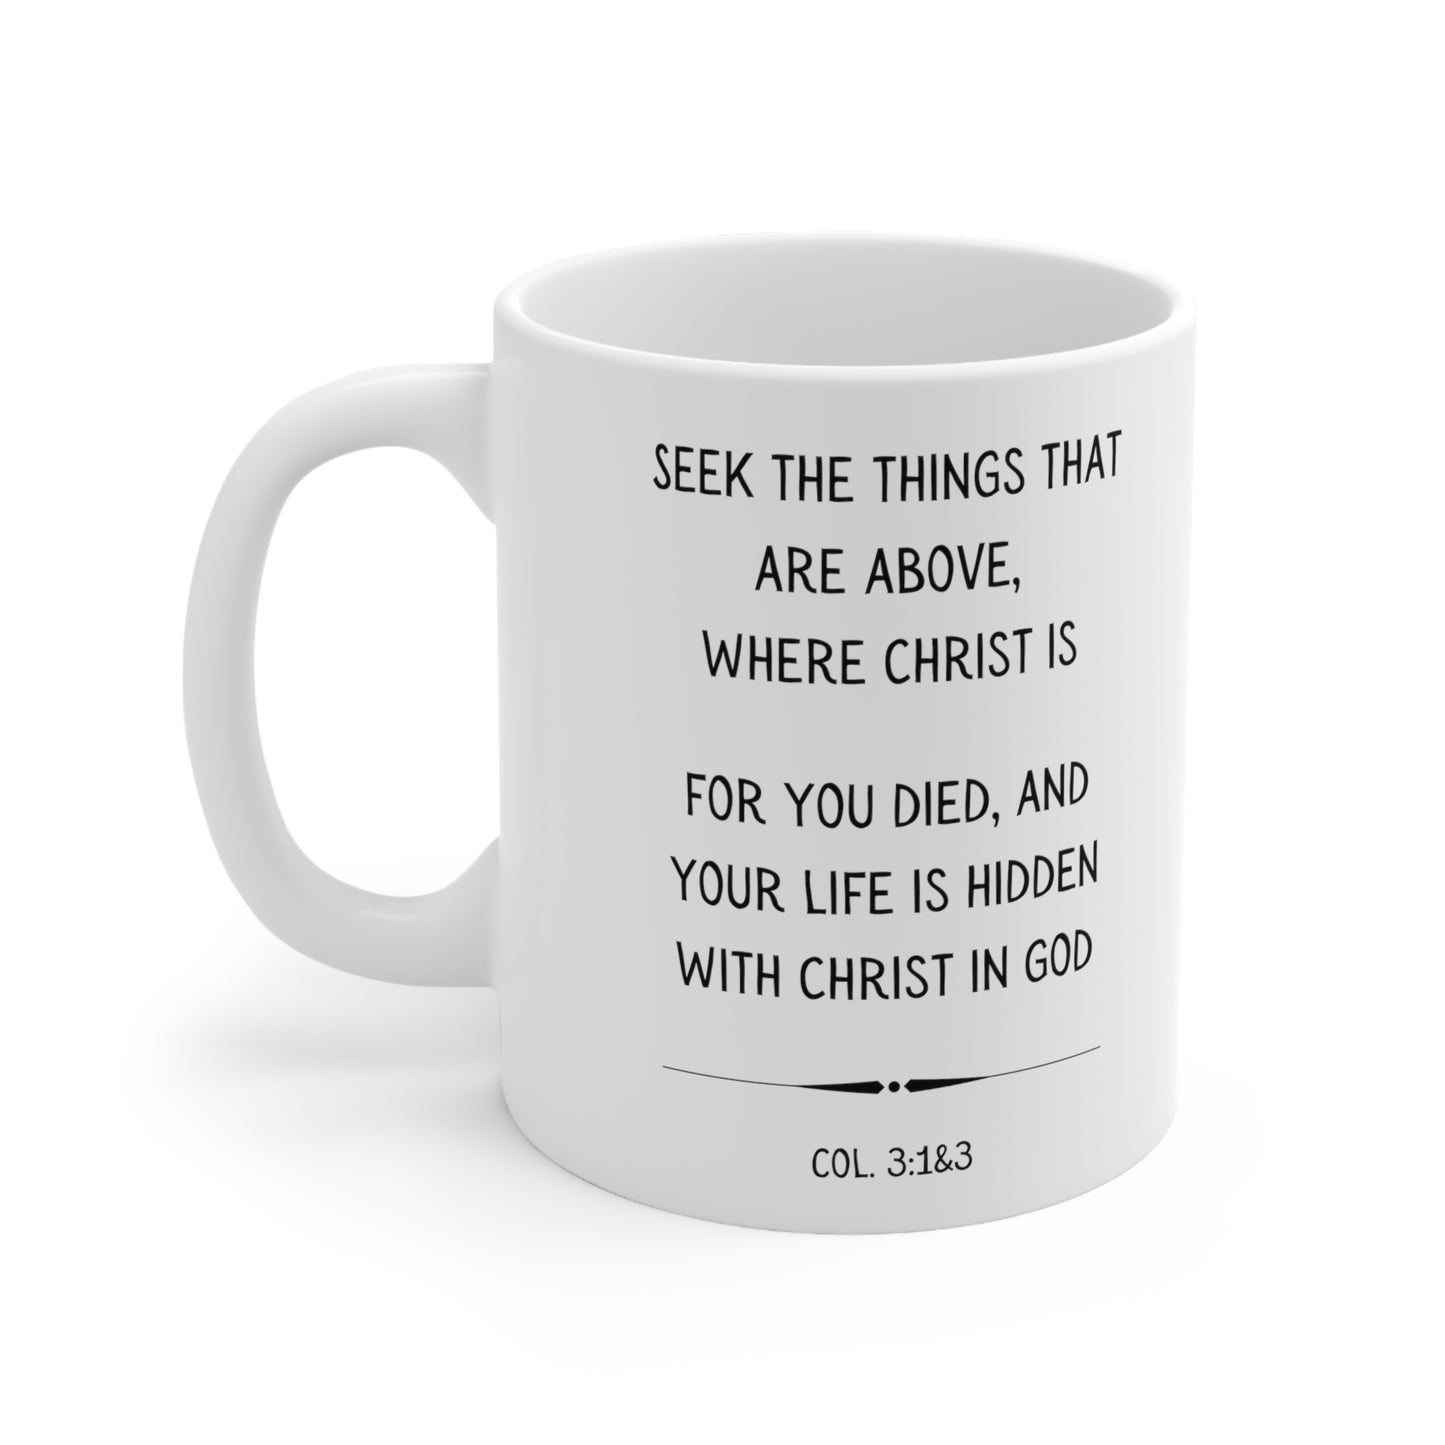 Scripture Mug, Seek The Things That Are Above, Colossians 3:1&3